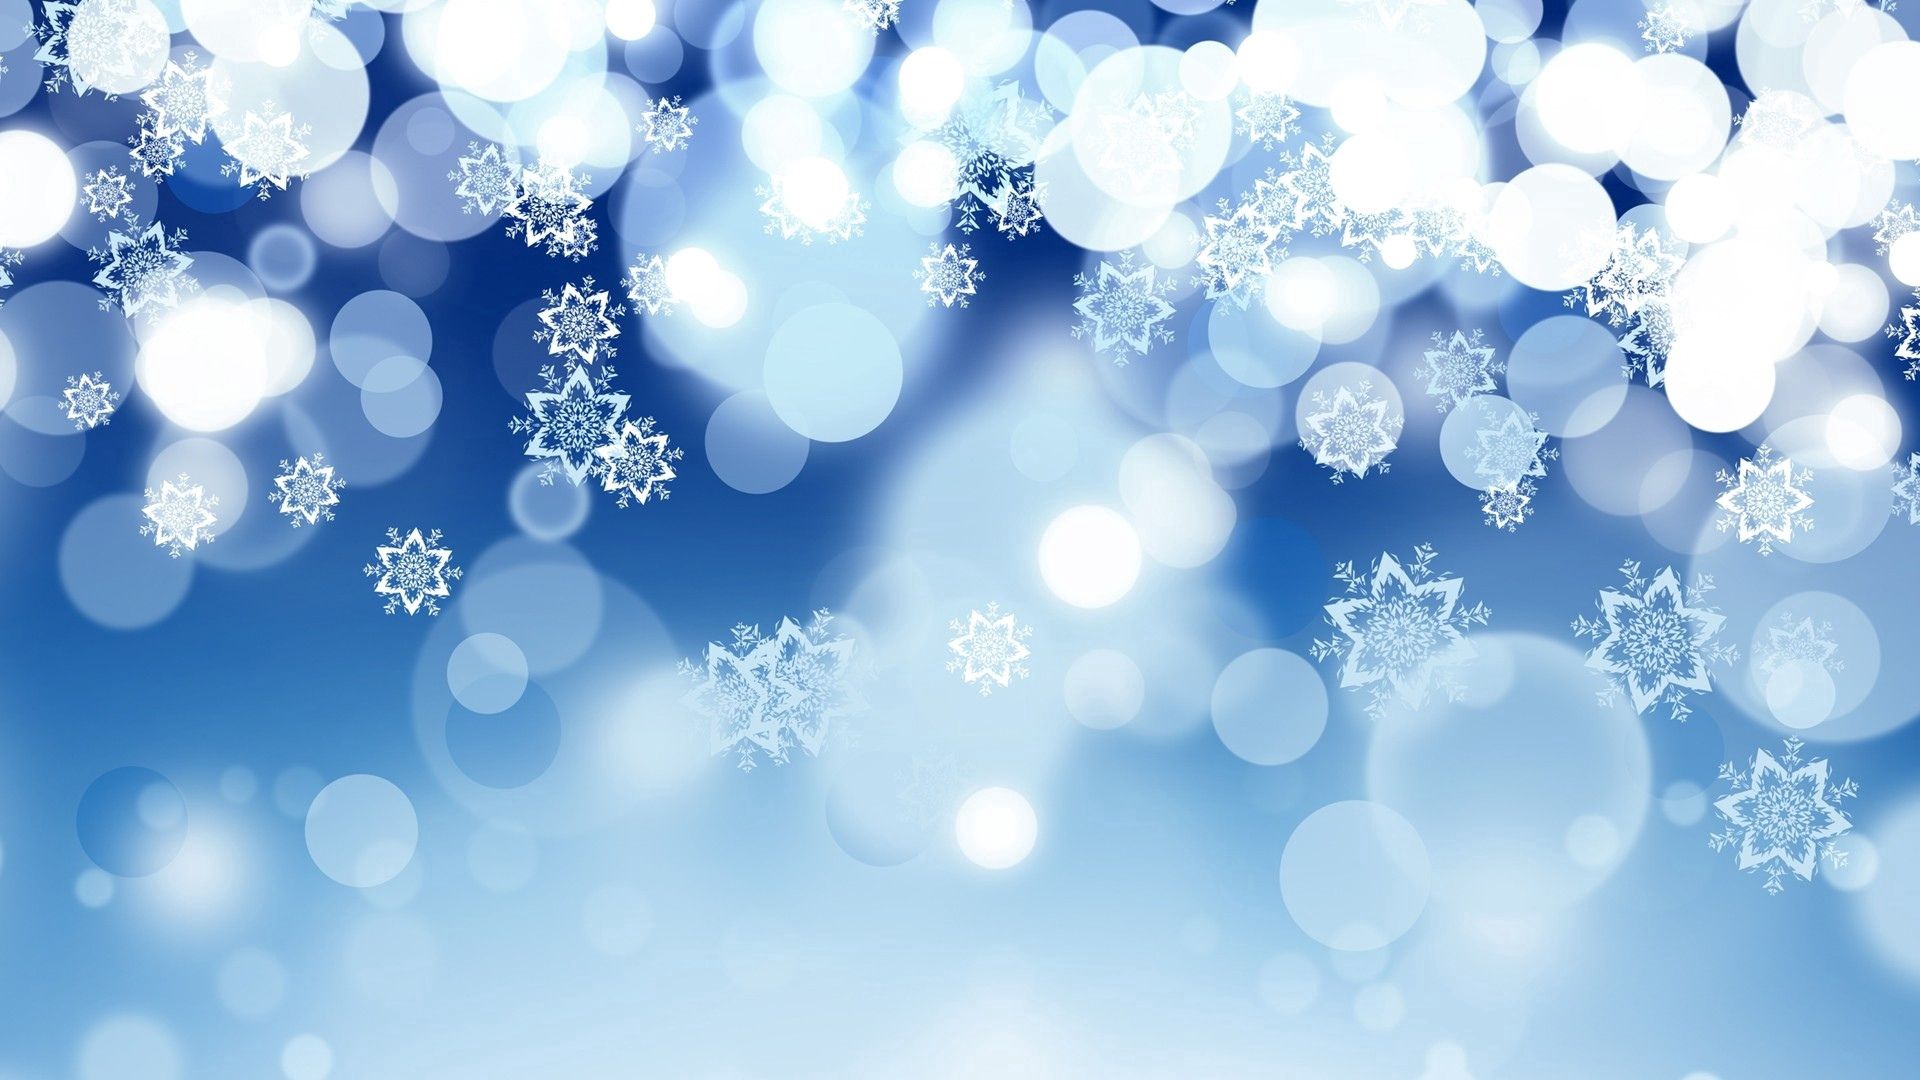 snowflakes, circles, abstract, background, stars, glare